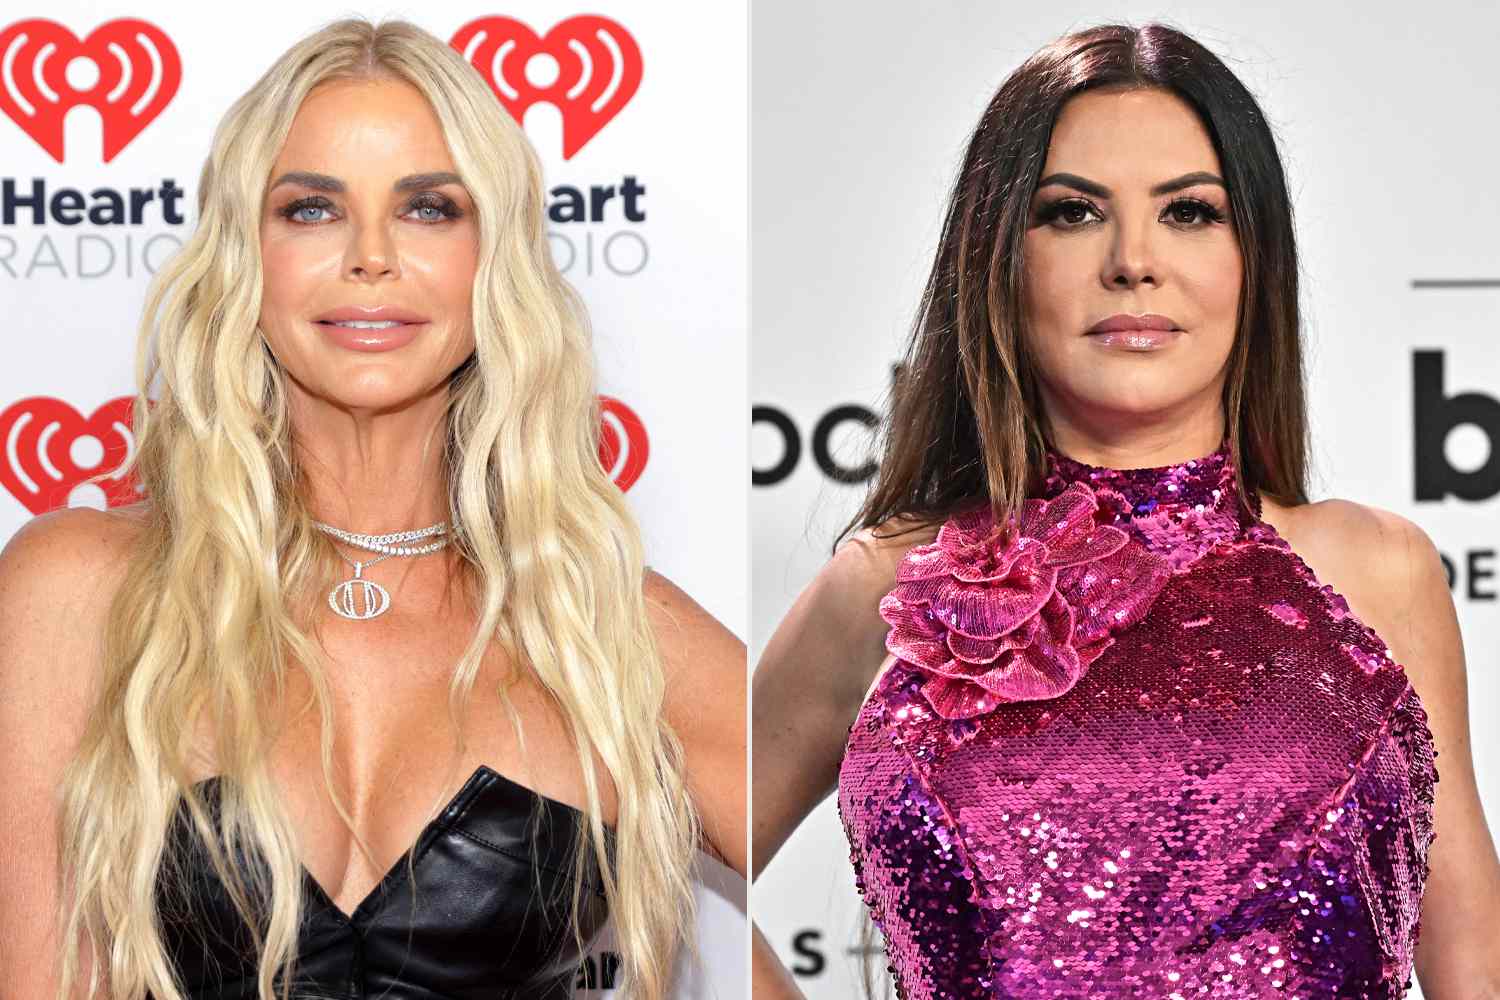 Screaming Match Erupts Between “RHOM” Stars Alexia Nepola And Adriana De Moura At Miami Airport